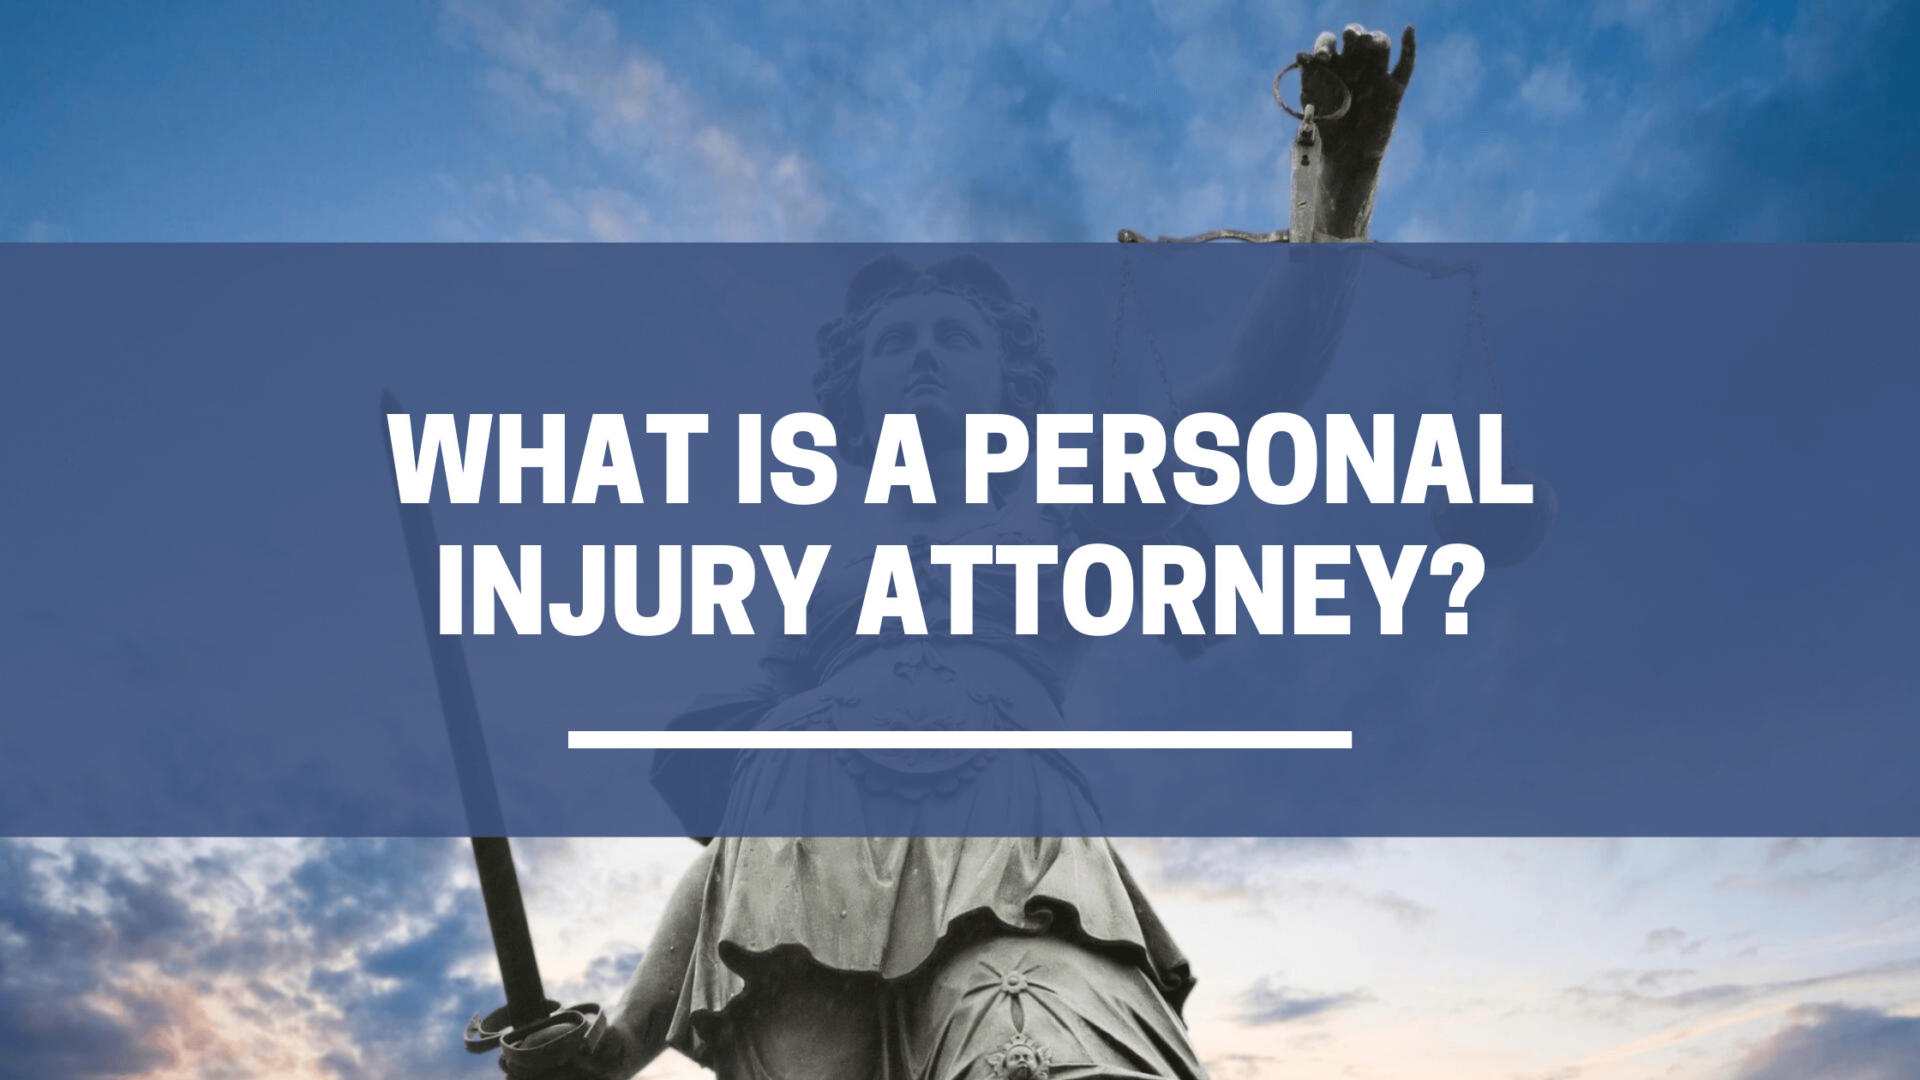 What is a personal injury attorney?